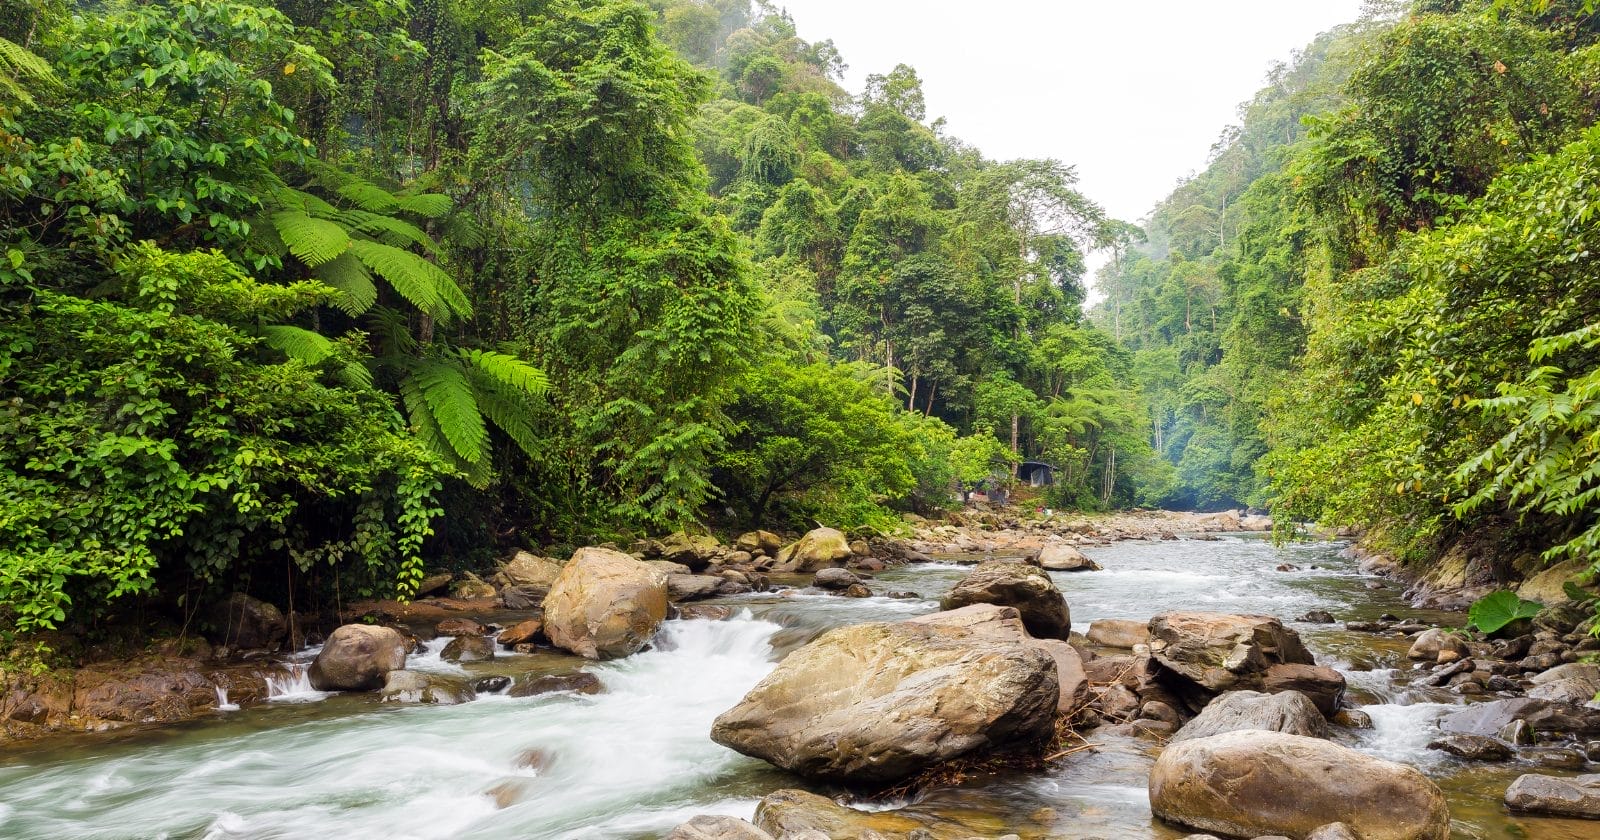 How To Get From Medan To Bukit Lawang? Find Out Here!